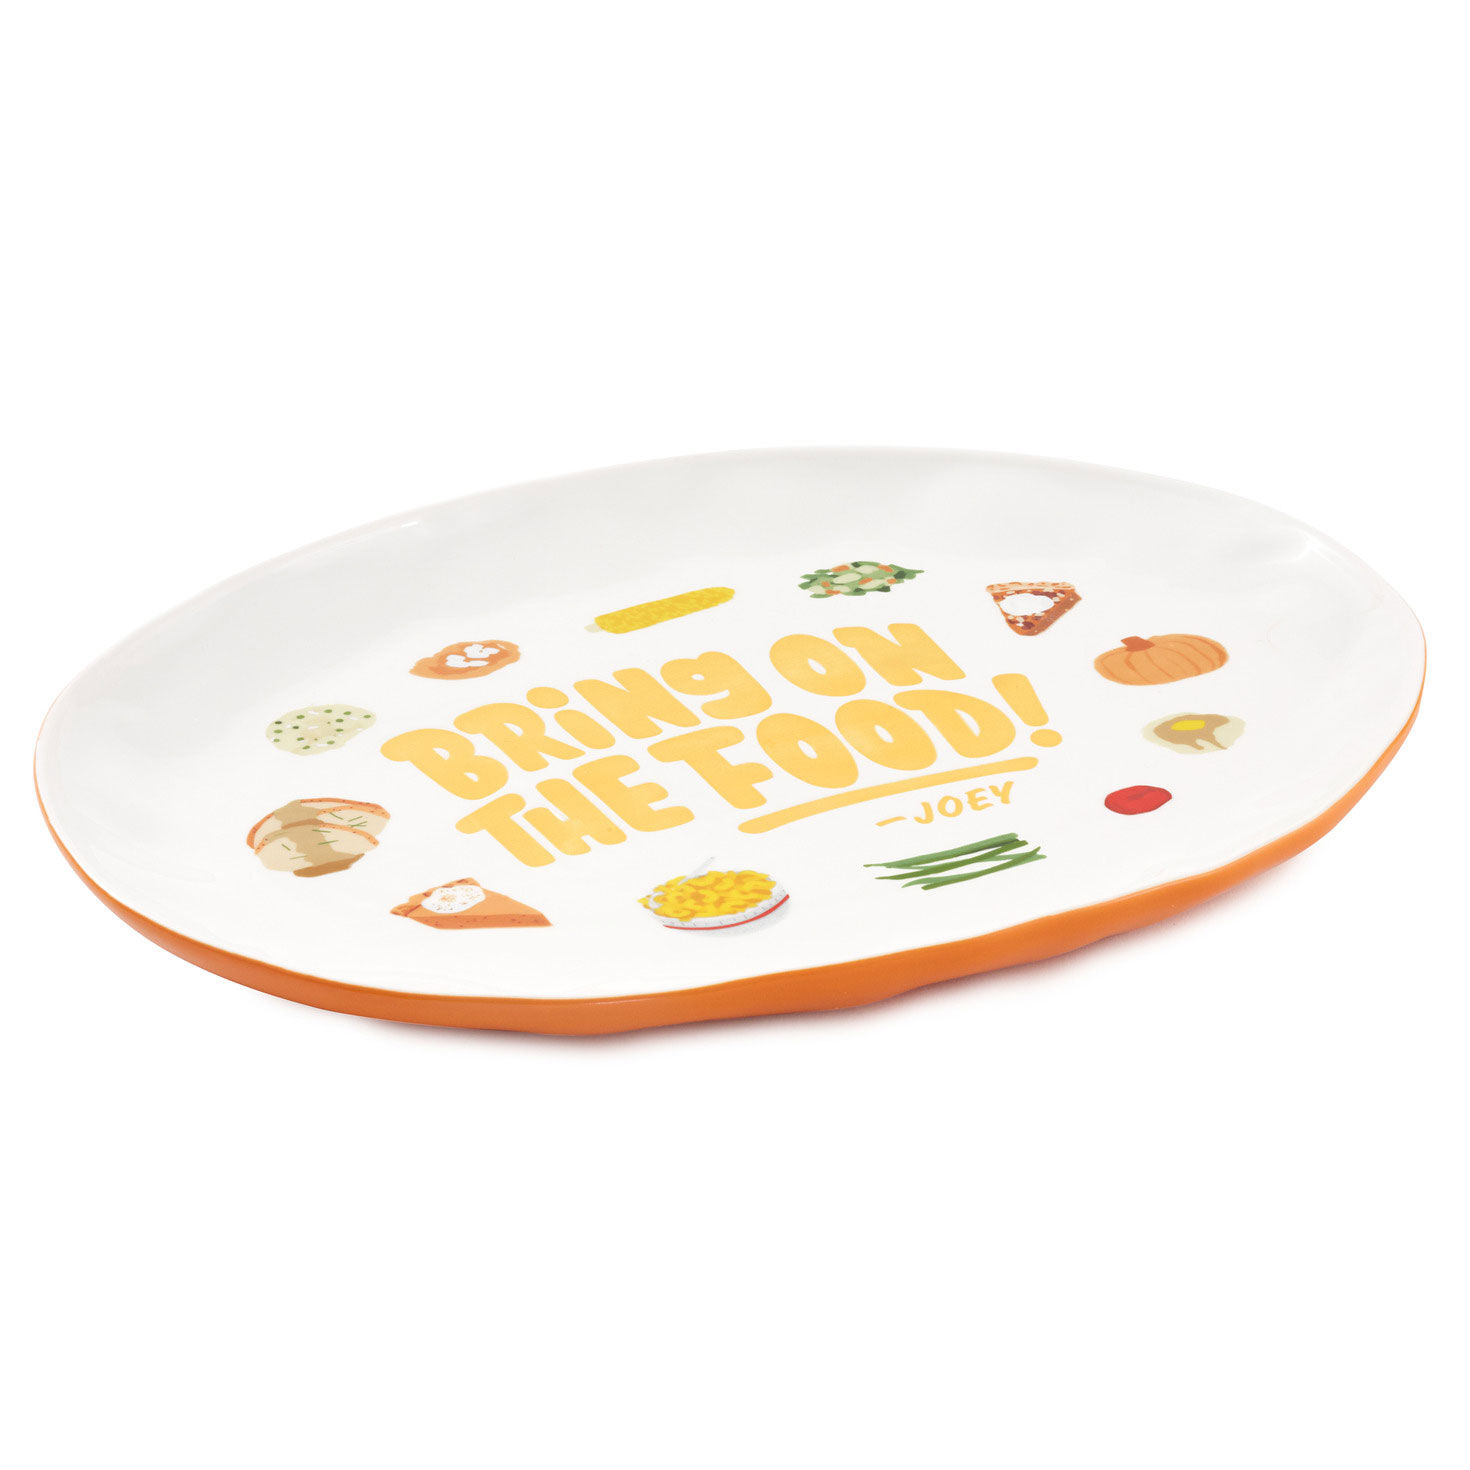 Friends Bring On the Food Serving Platter for only USD 34.99 | Hallmark